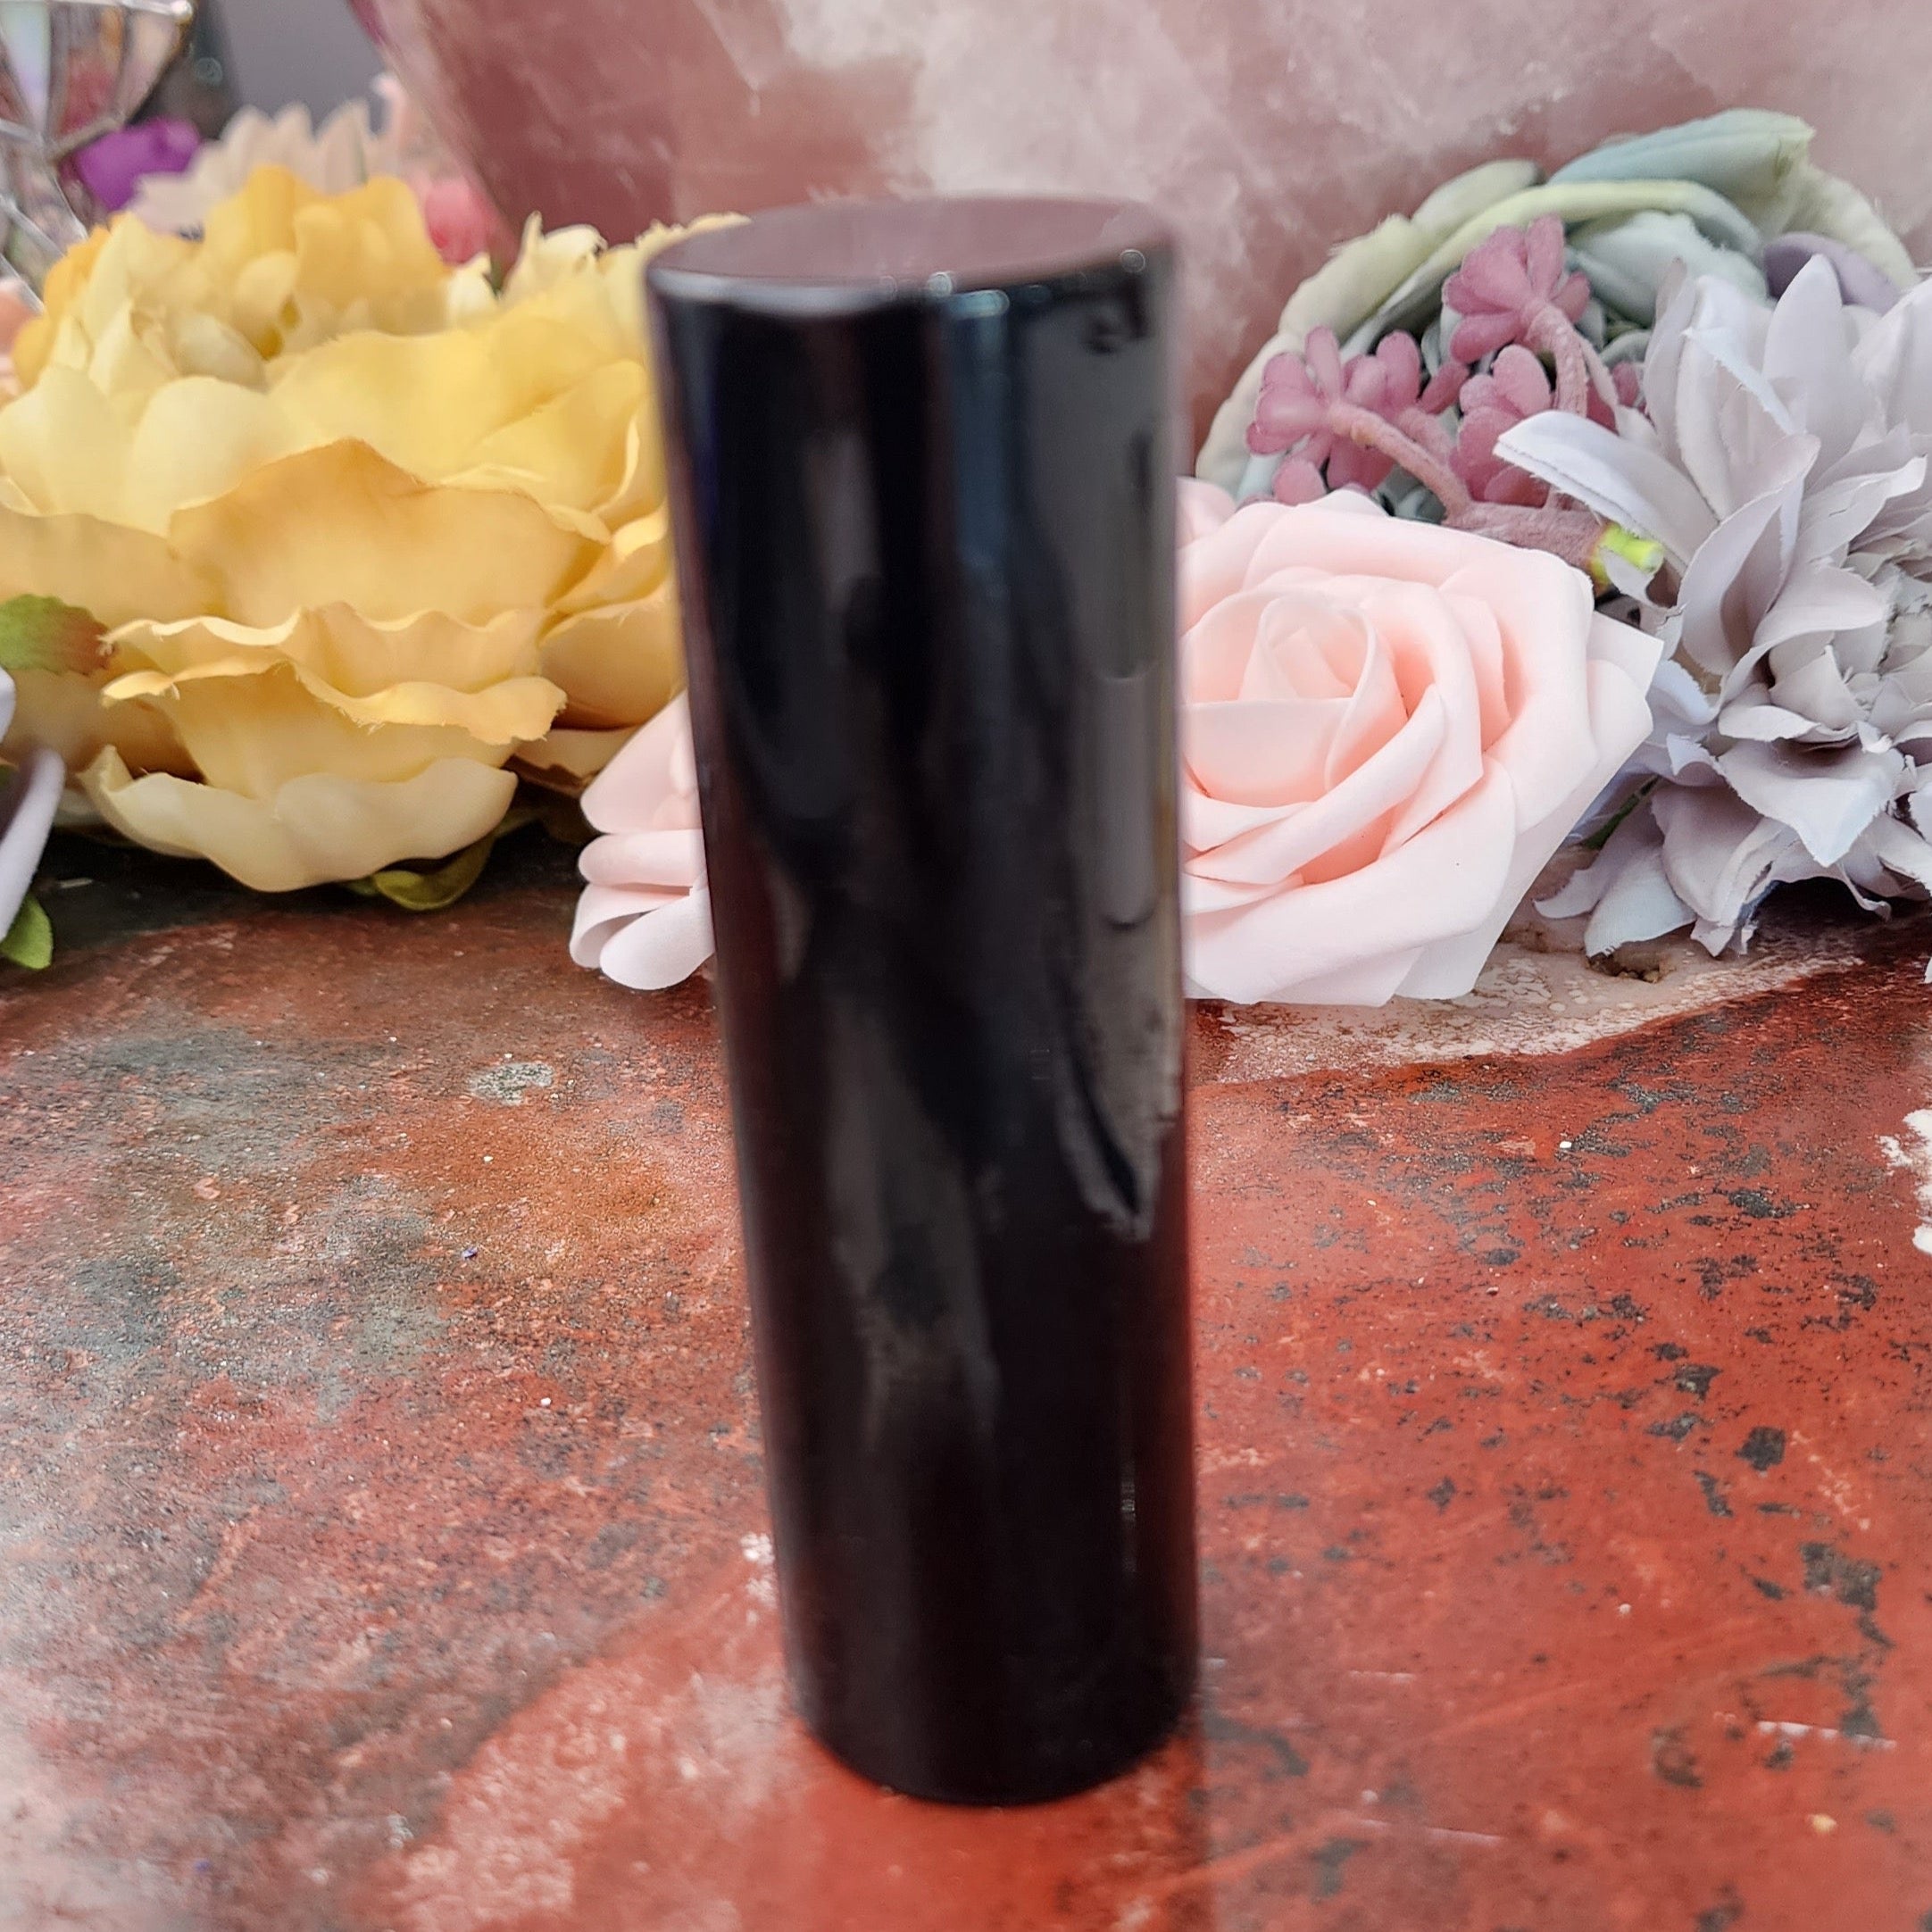 Obsidian Harmonizer for Grounding, Protection and Uncovering Unconscious Thoughts